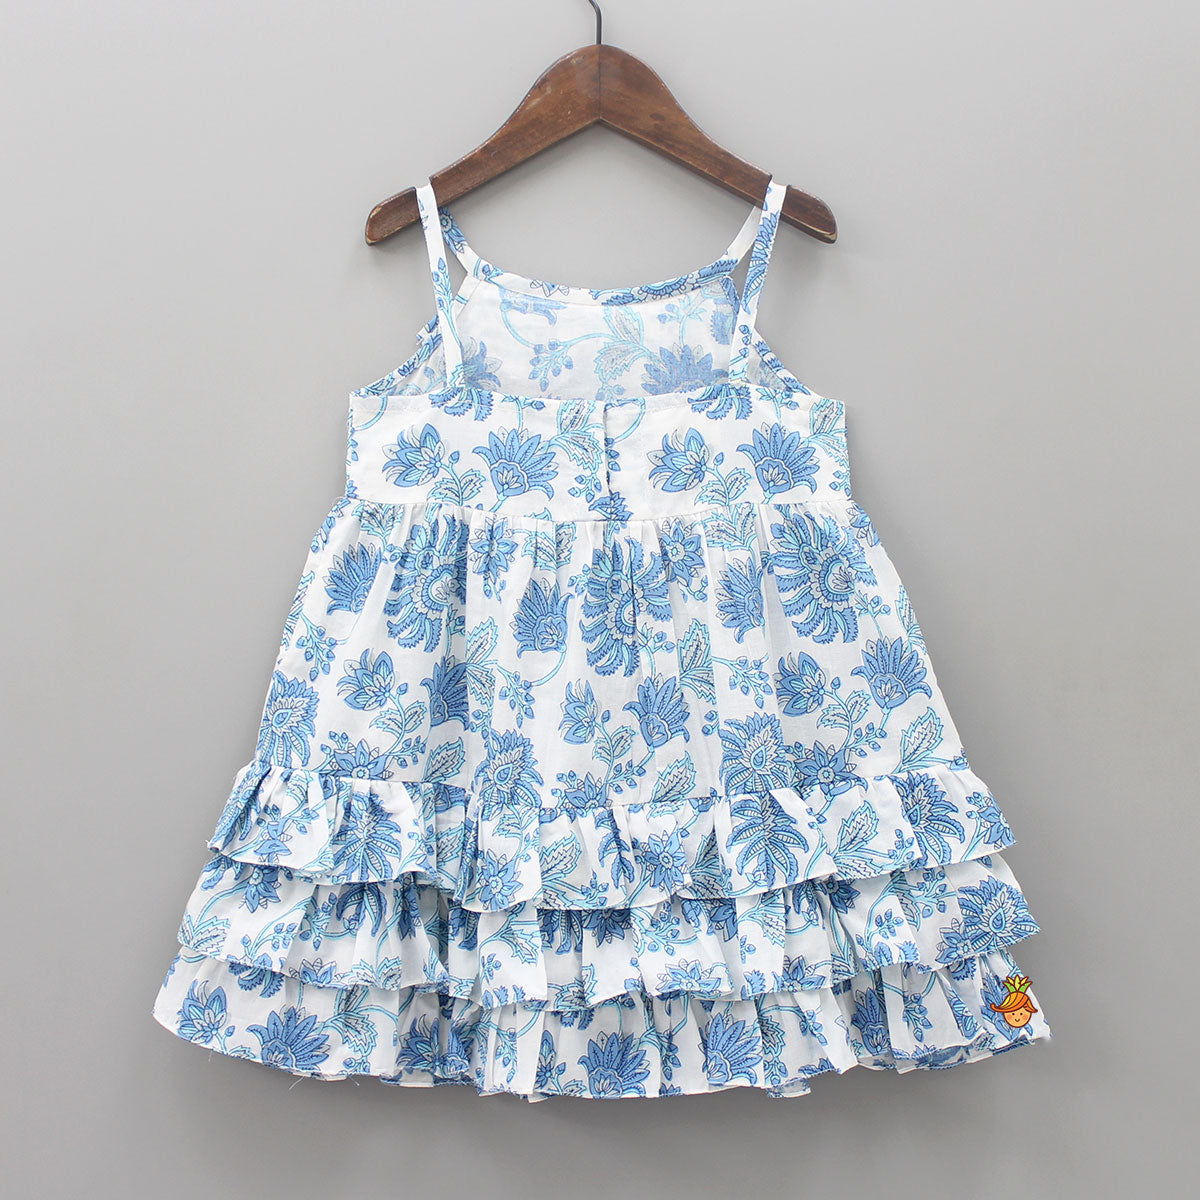 Floral Printed Frilly Layered Dress